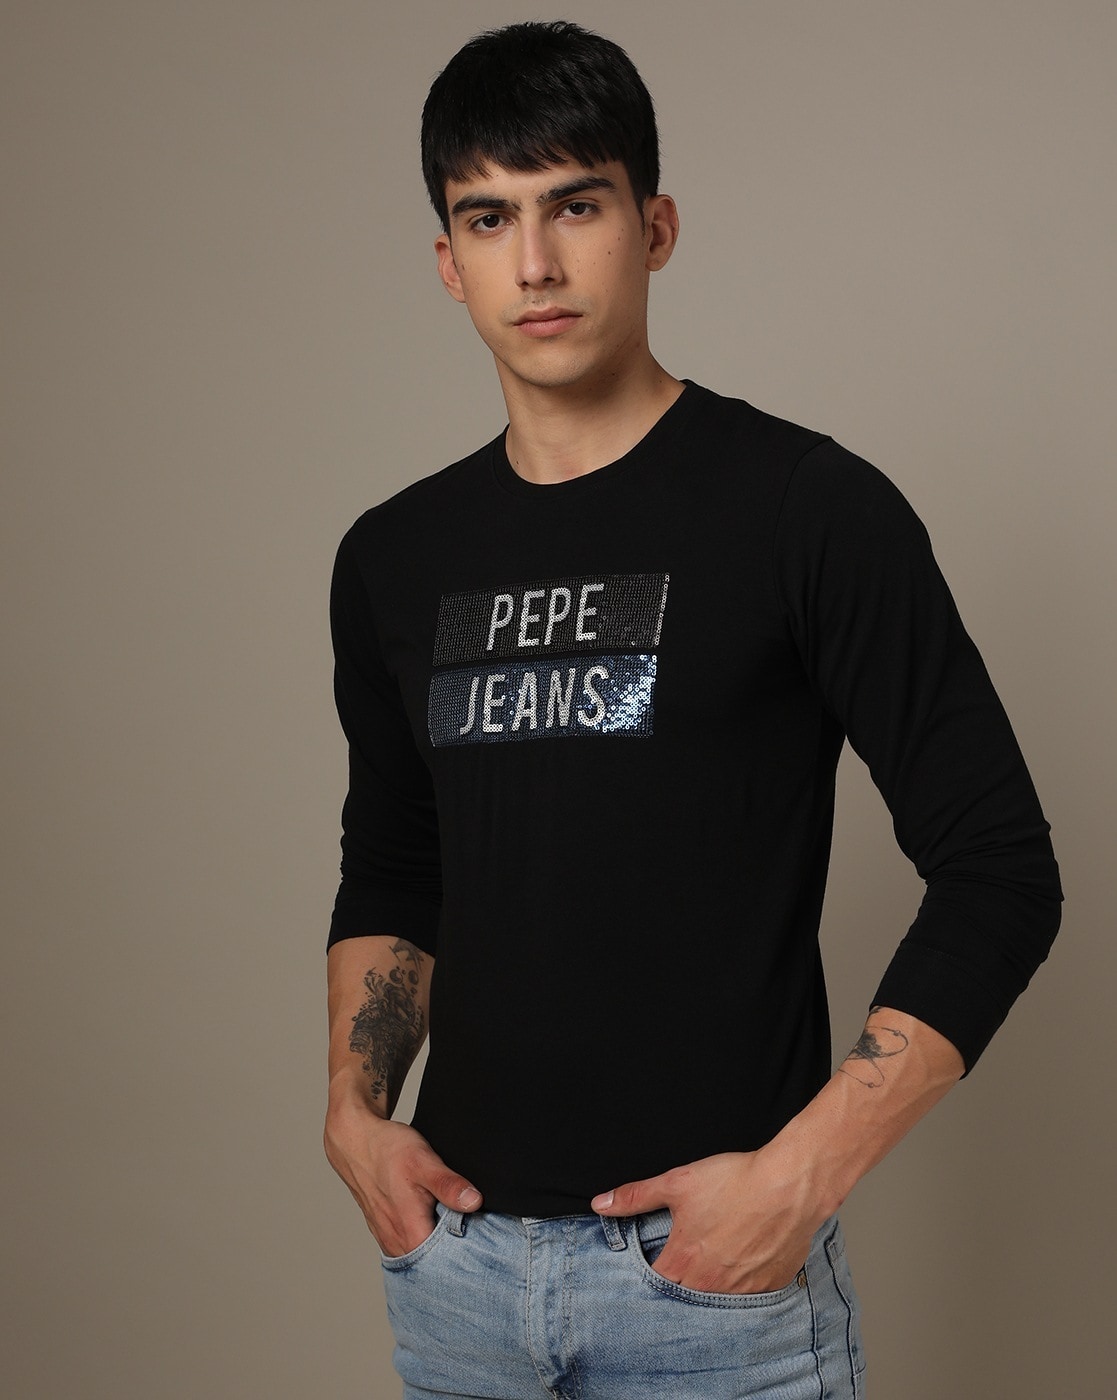 Jeans Buy for Tshirts Men Black Pepe Online by